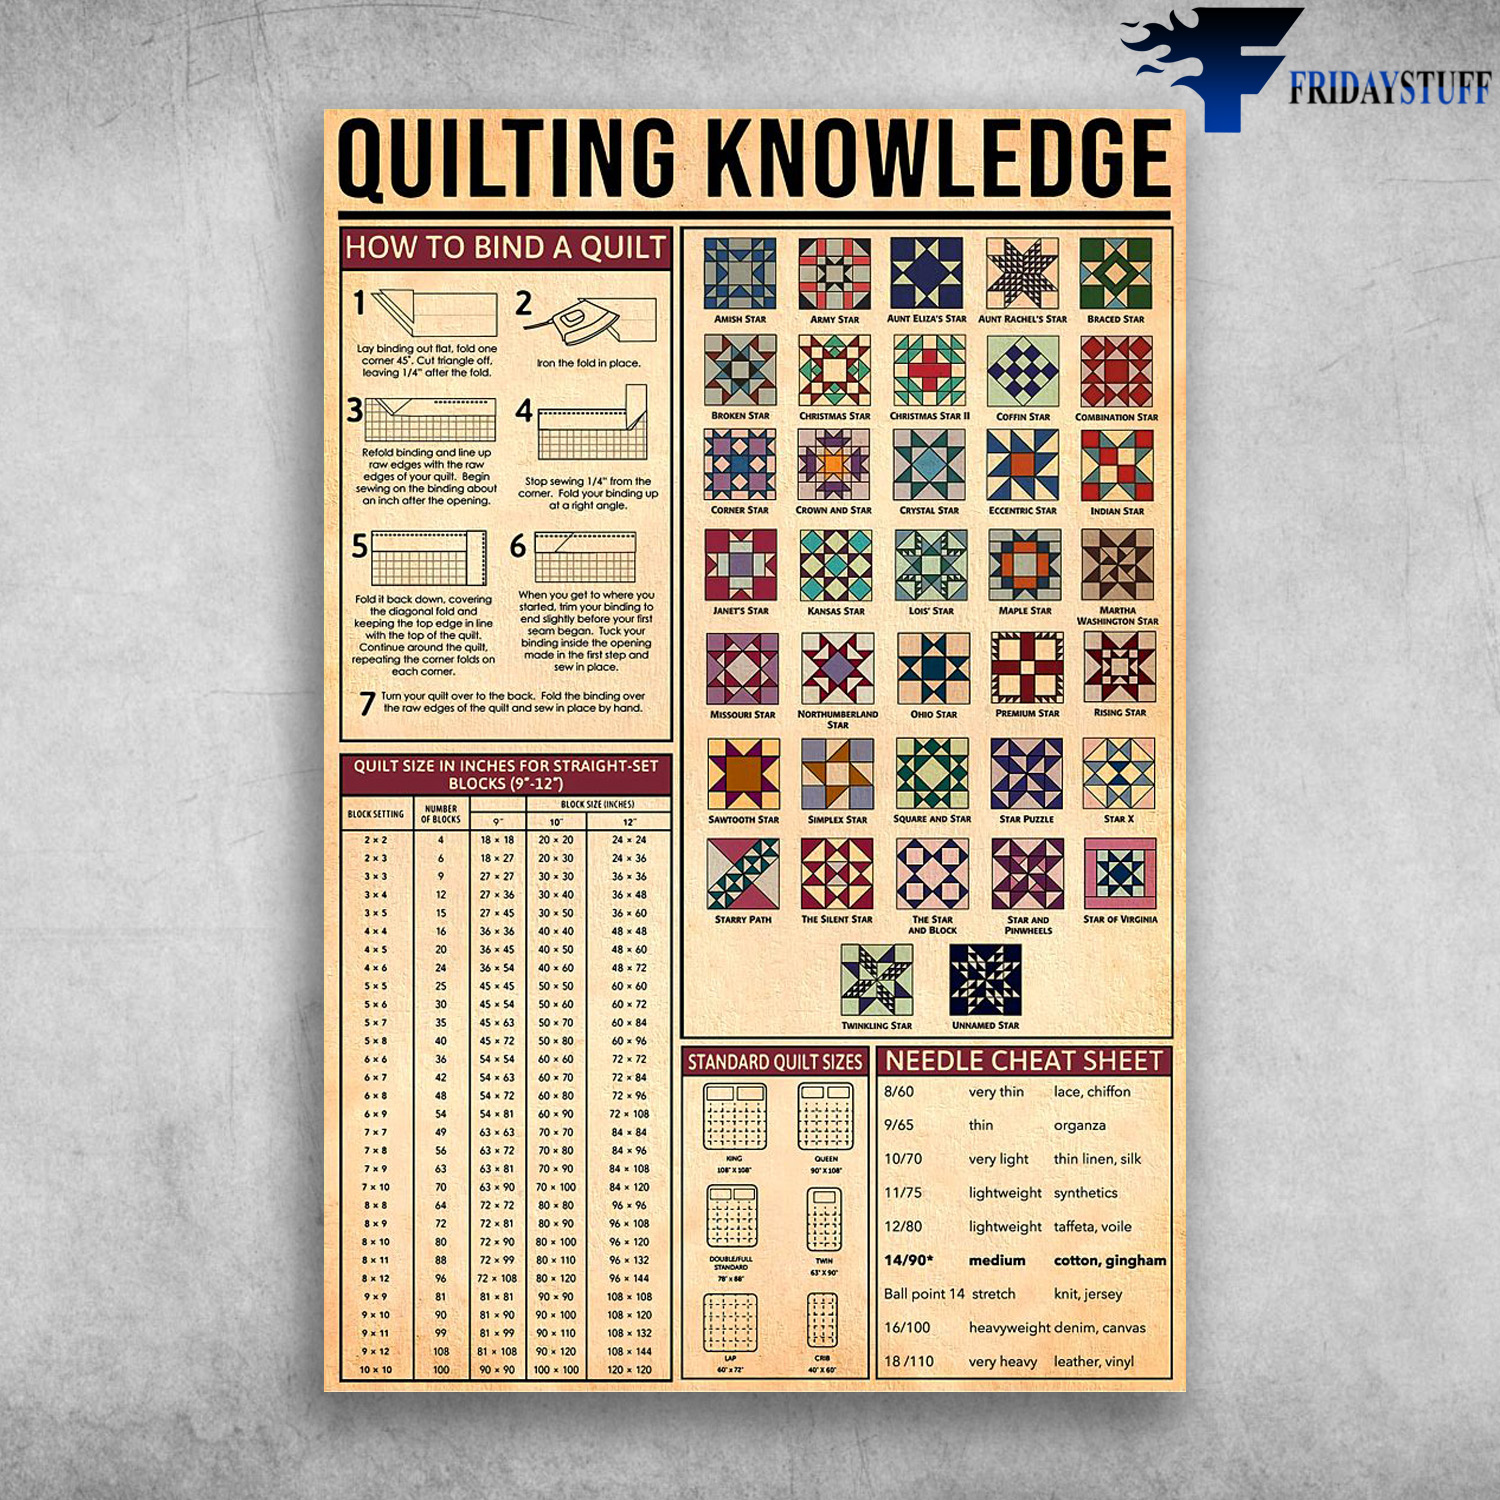 Quilting Knowledge - How To Bind A Quilt, Quilt Size In Inches For Straight-Set Blocks, Standard Quilt Sizes, Needle Cheat Sheet